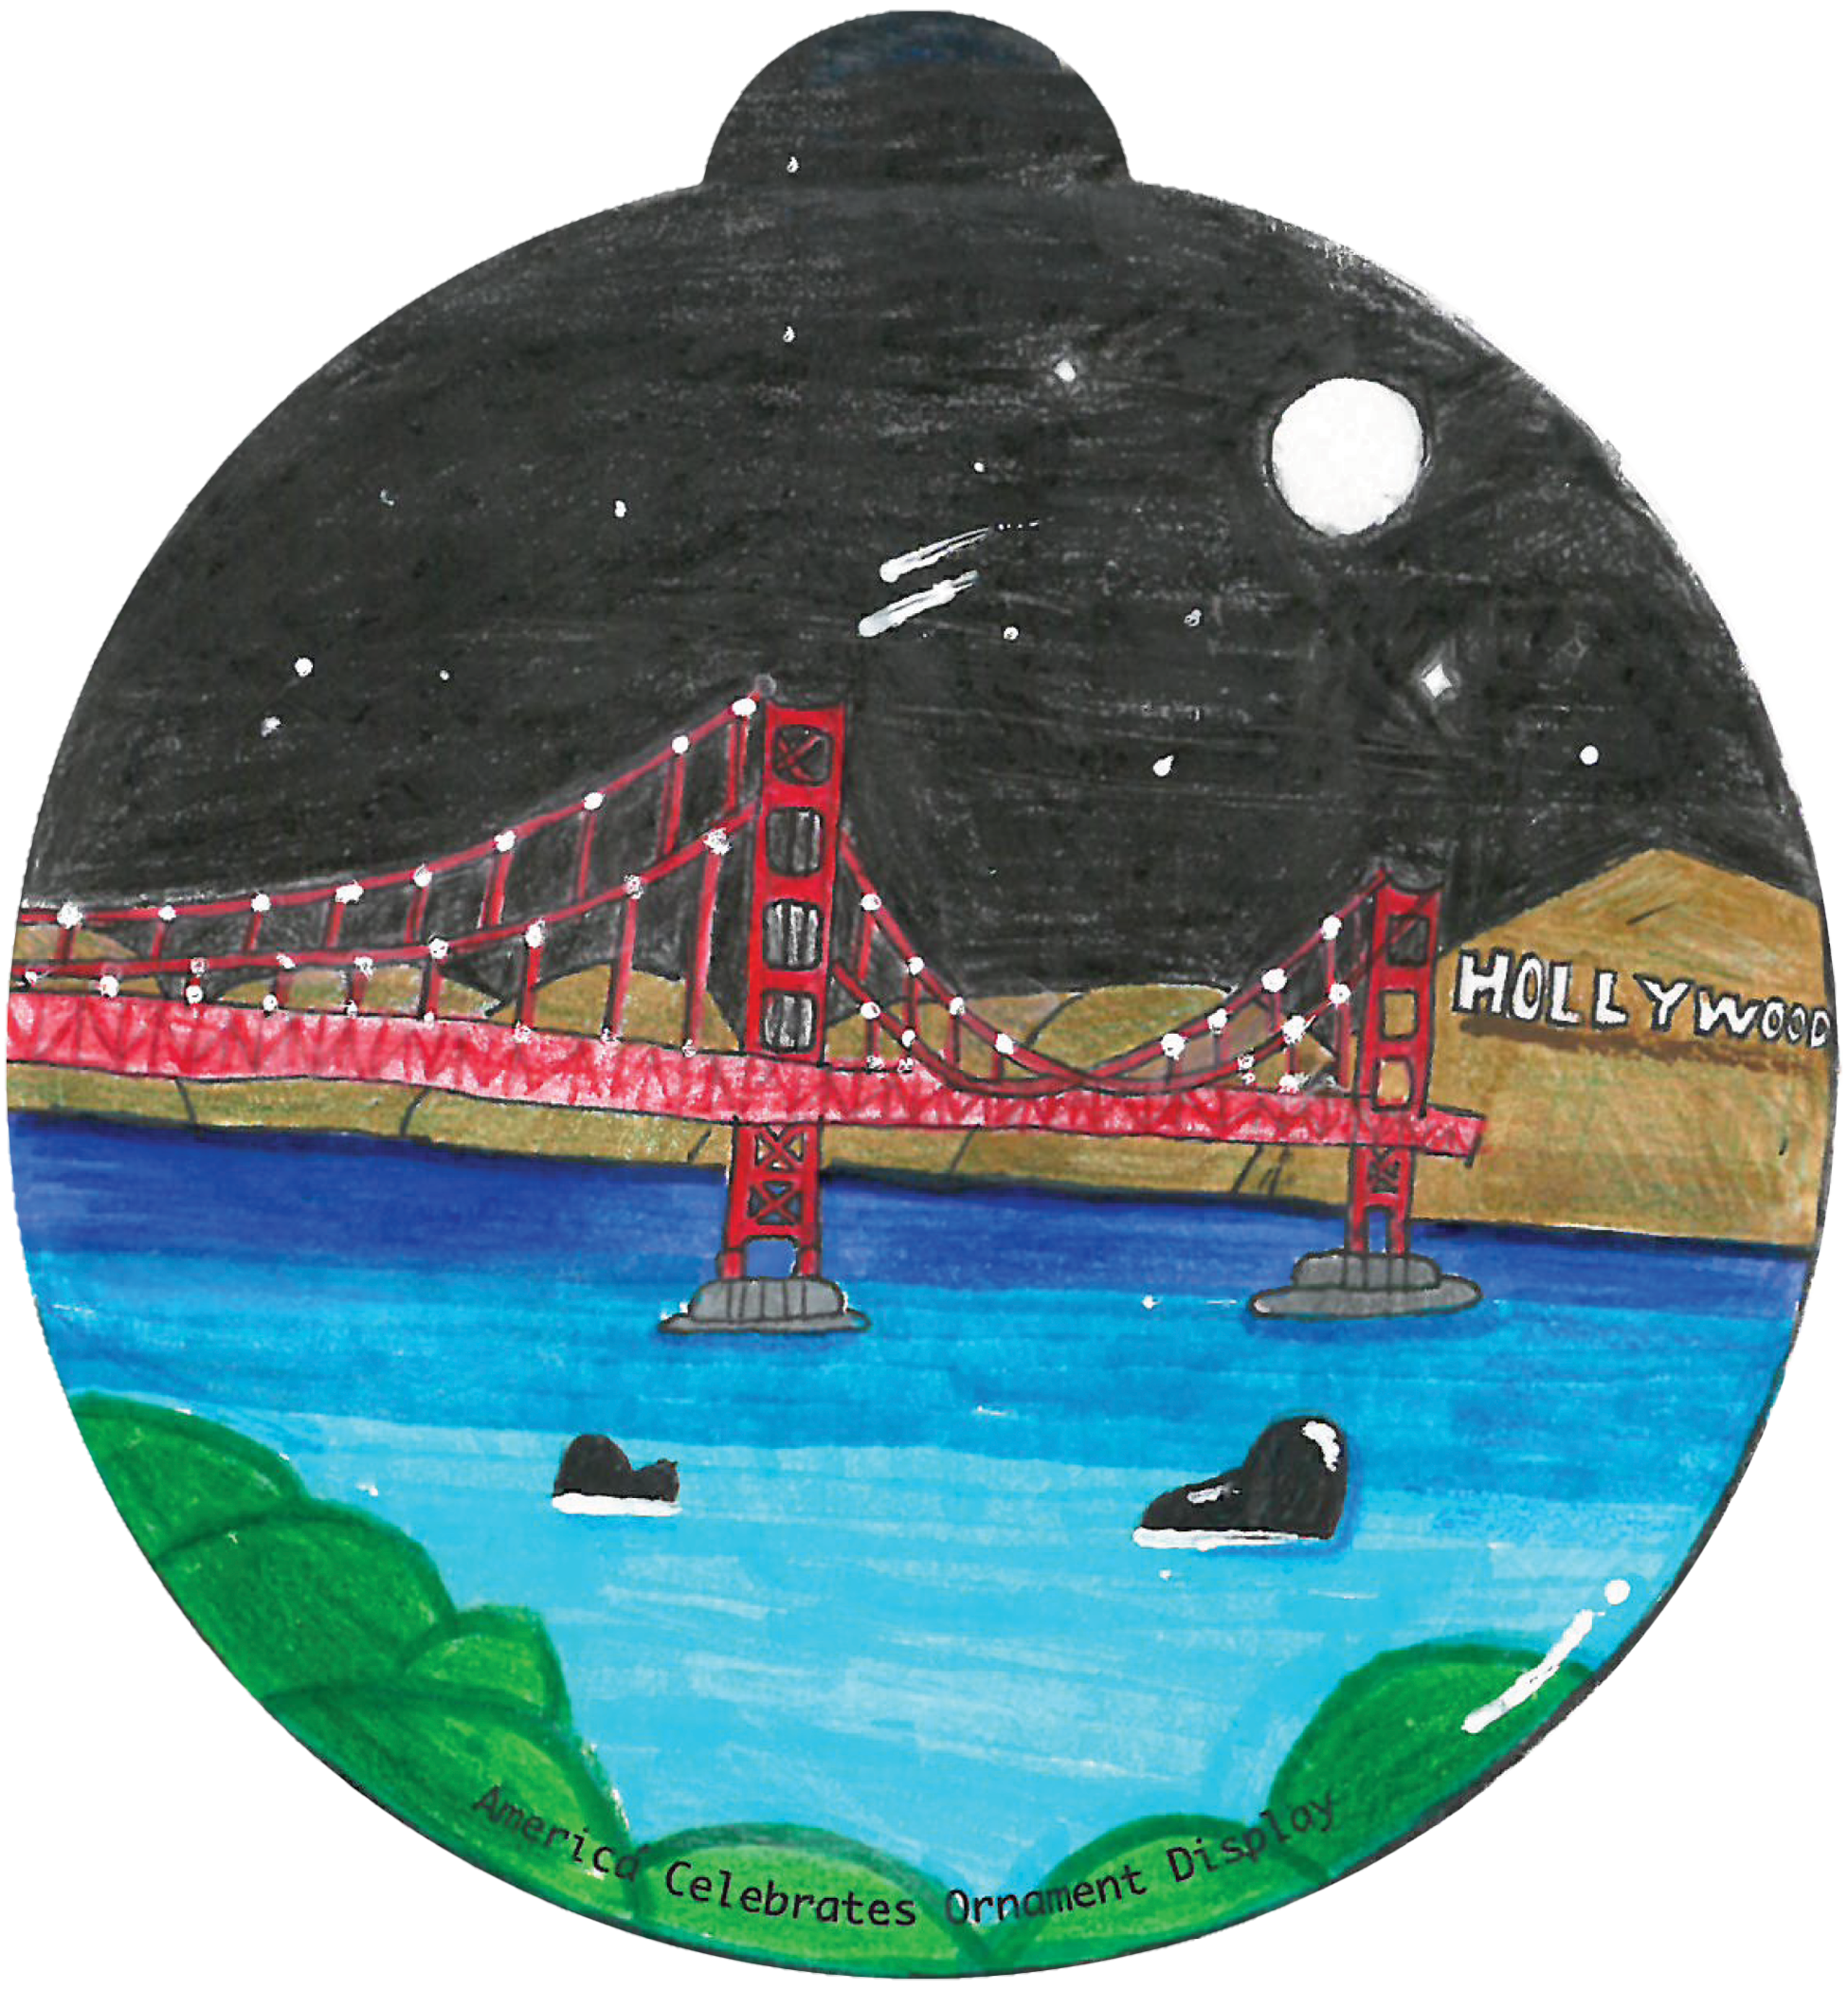 ornament depicting whales in the water below the San Francisco bridge at night